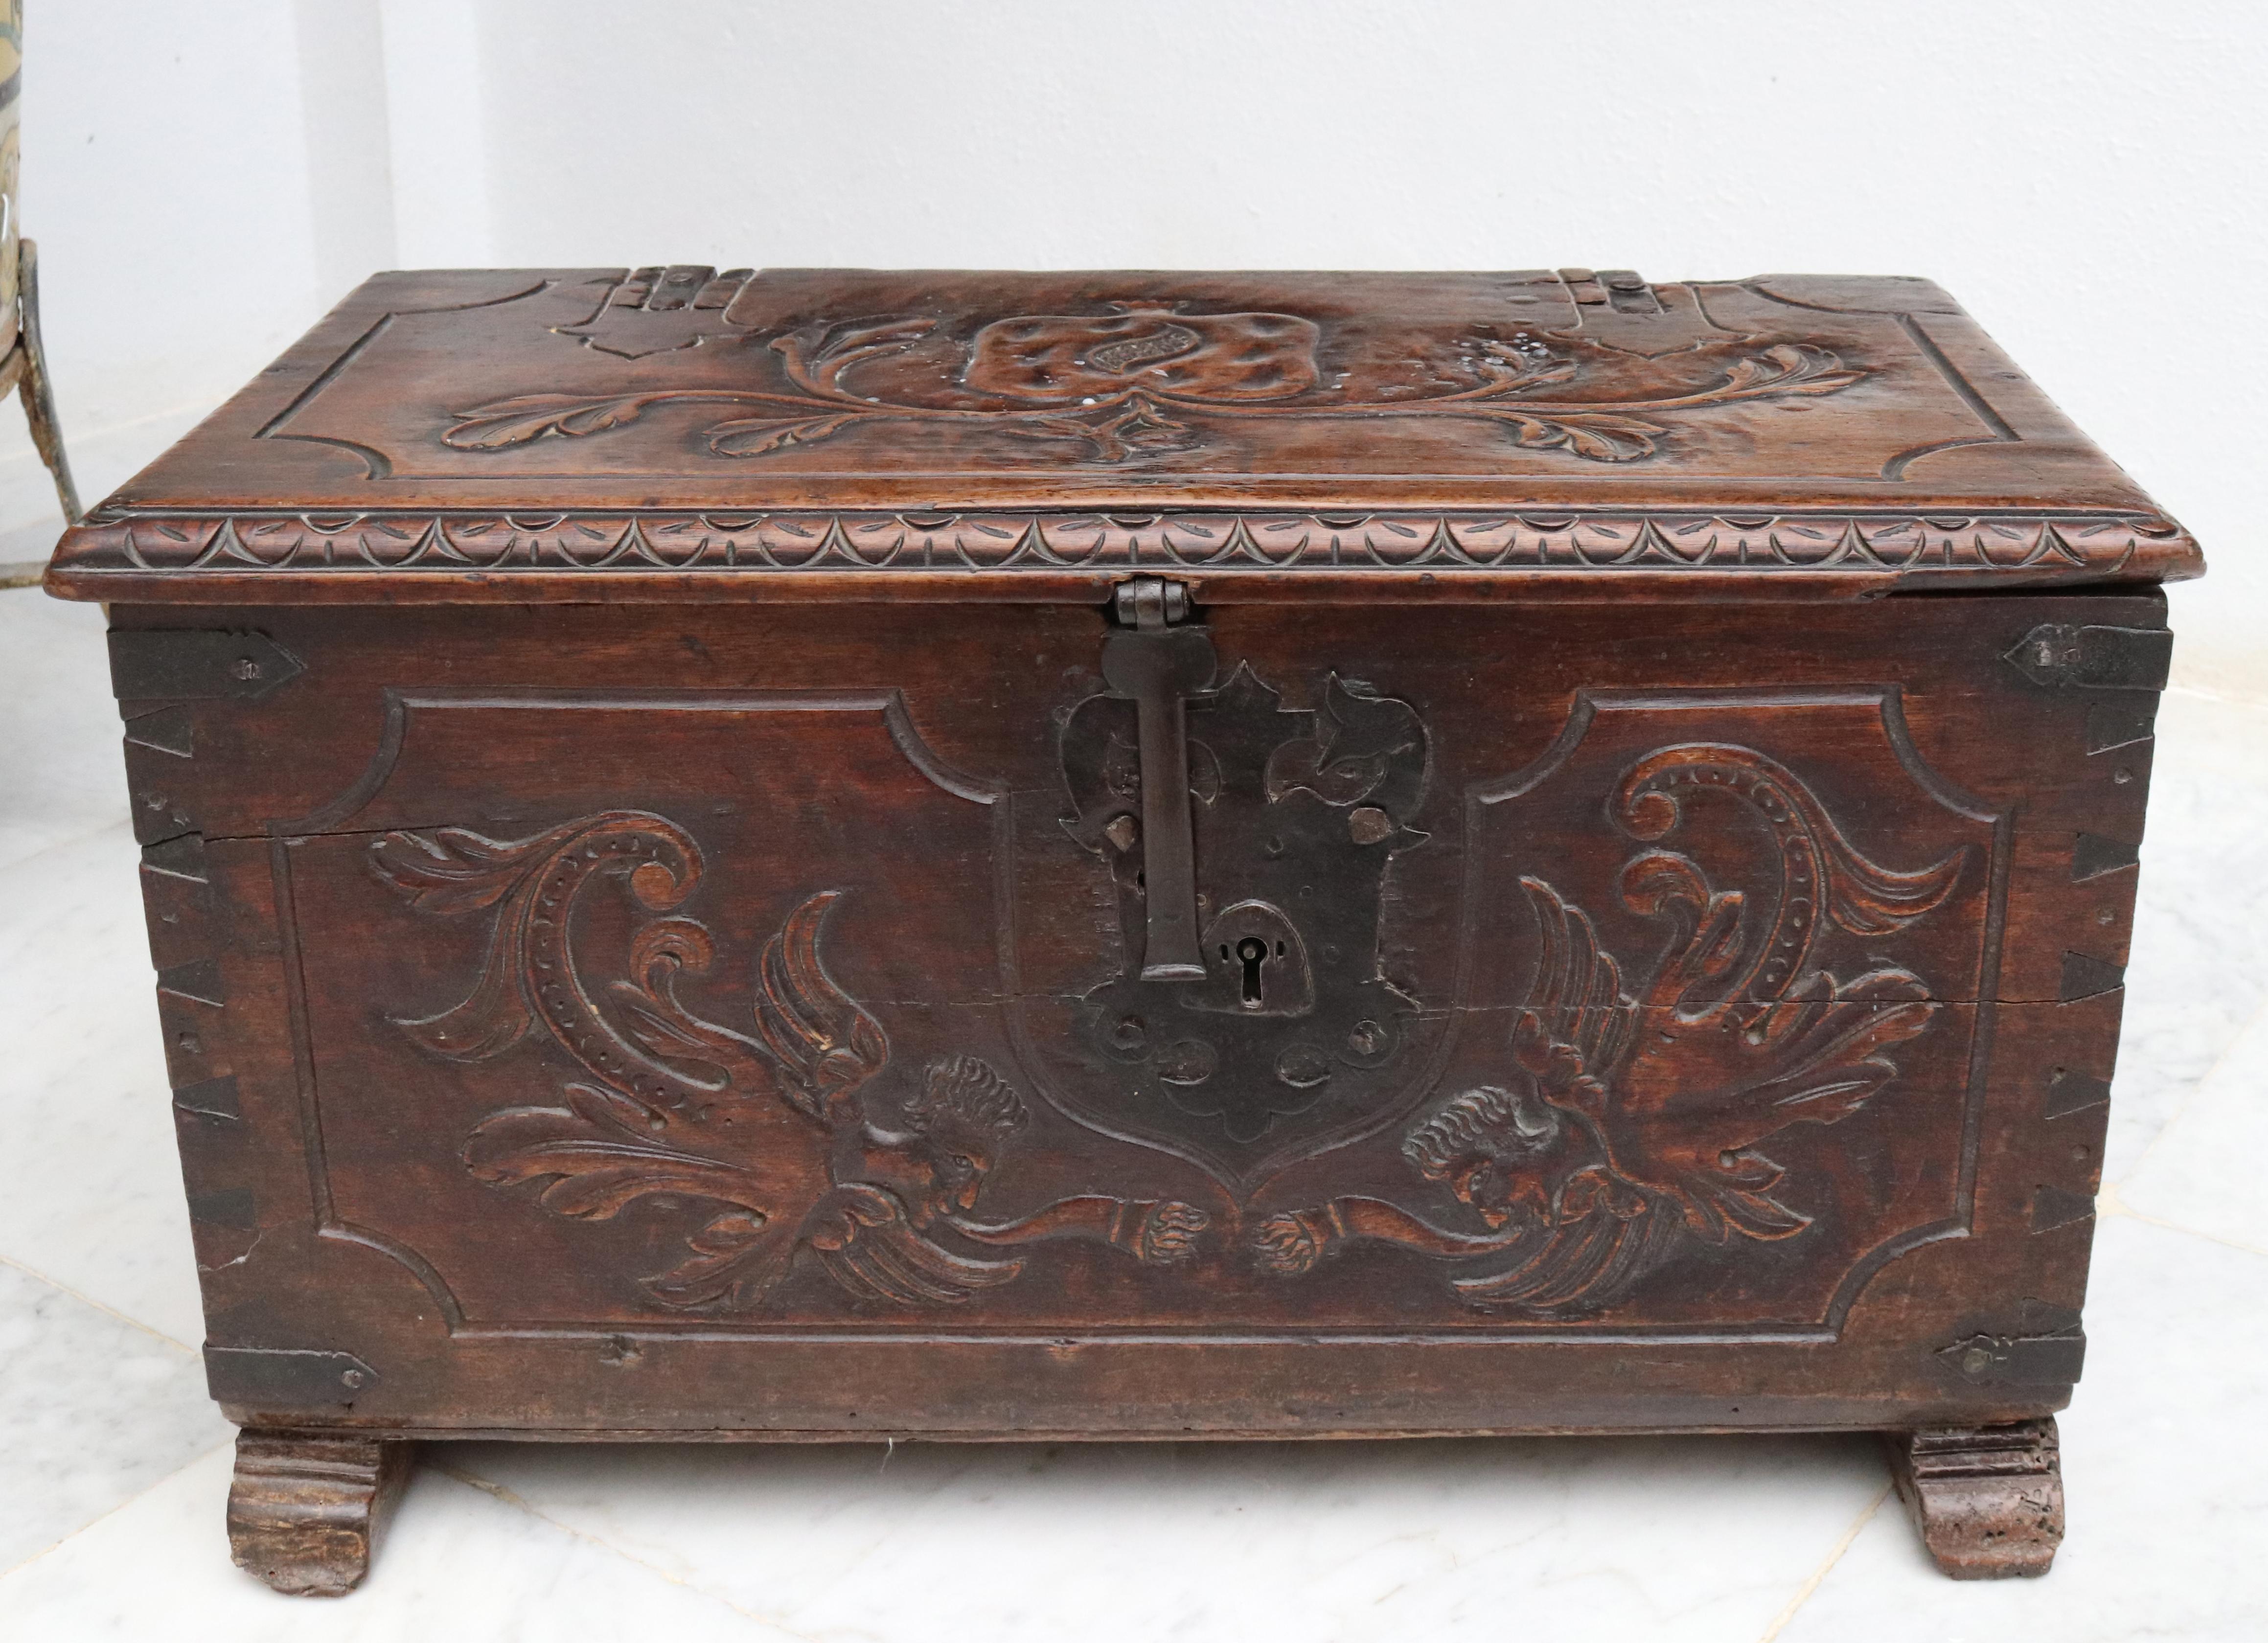 18th century colonial wooden trunk with hand carved ornamental, flower and bust reliefs on top and sides. Wrought iron fittings, decorations and side handles.
 